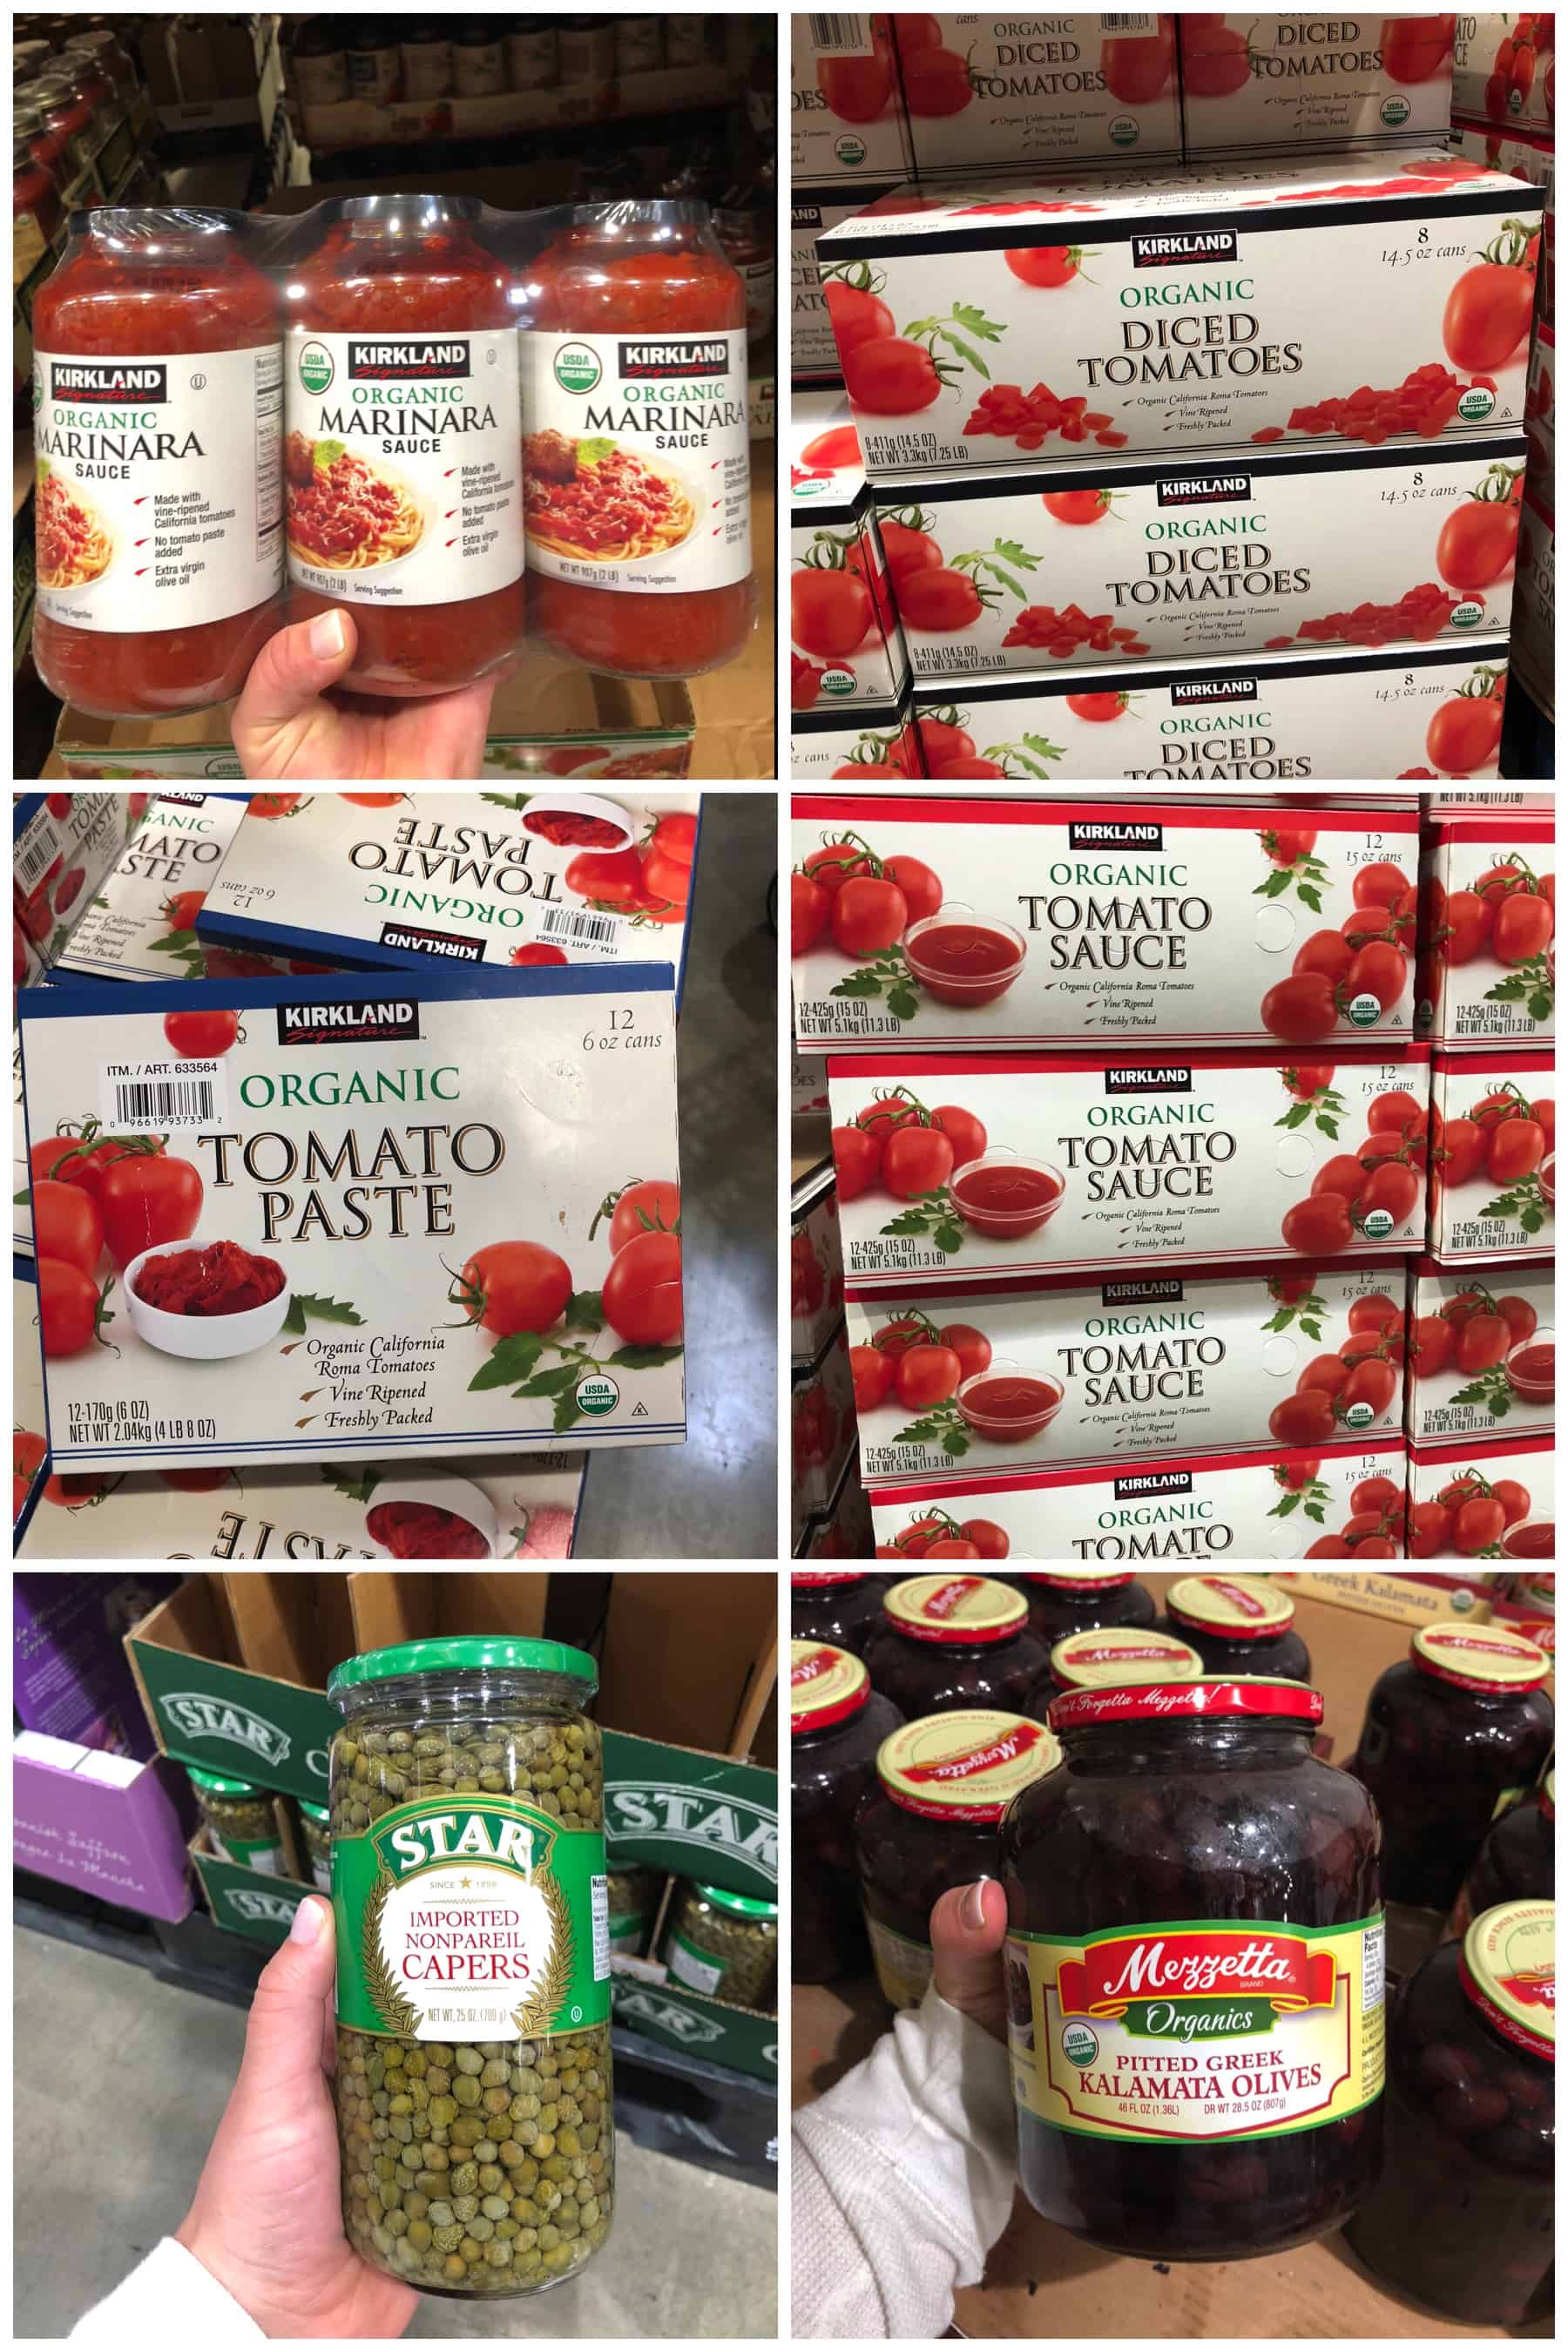 canned and jarred sauces for whole30 shopping list at Costco